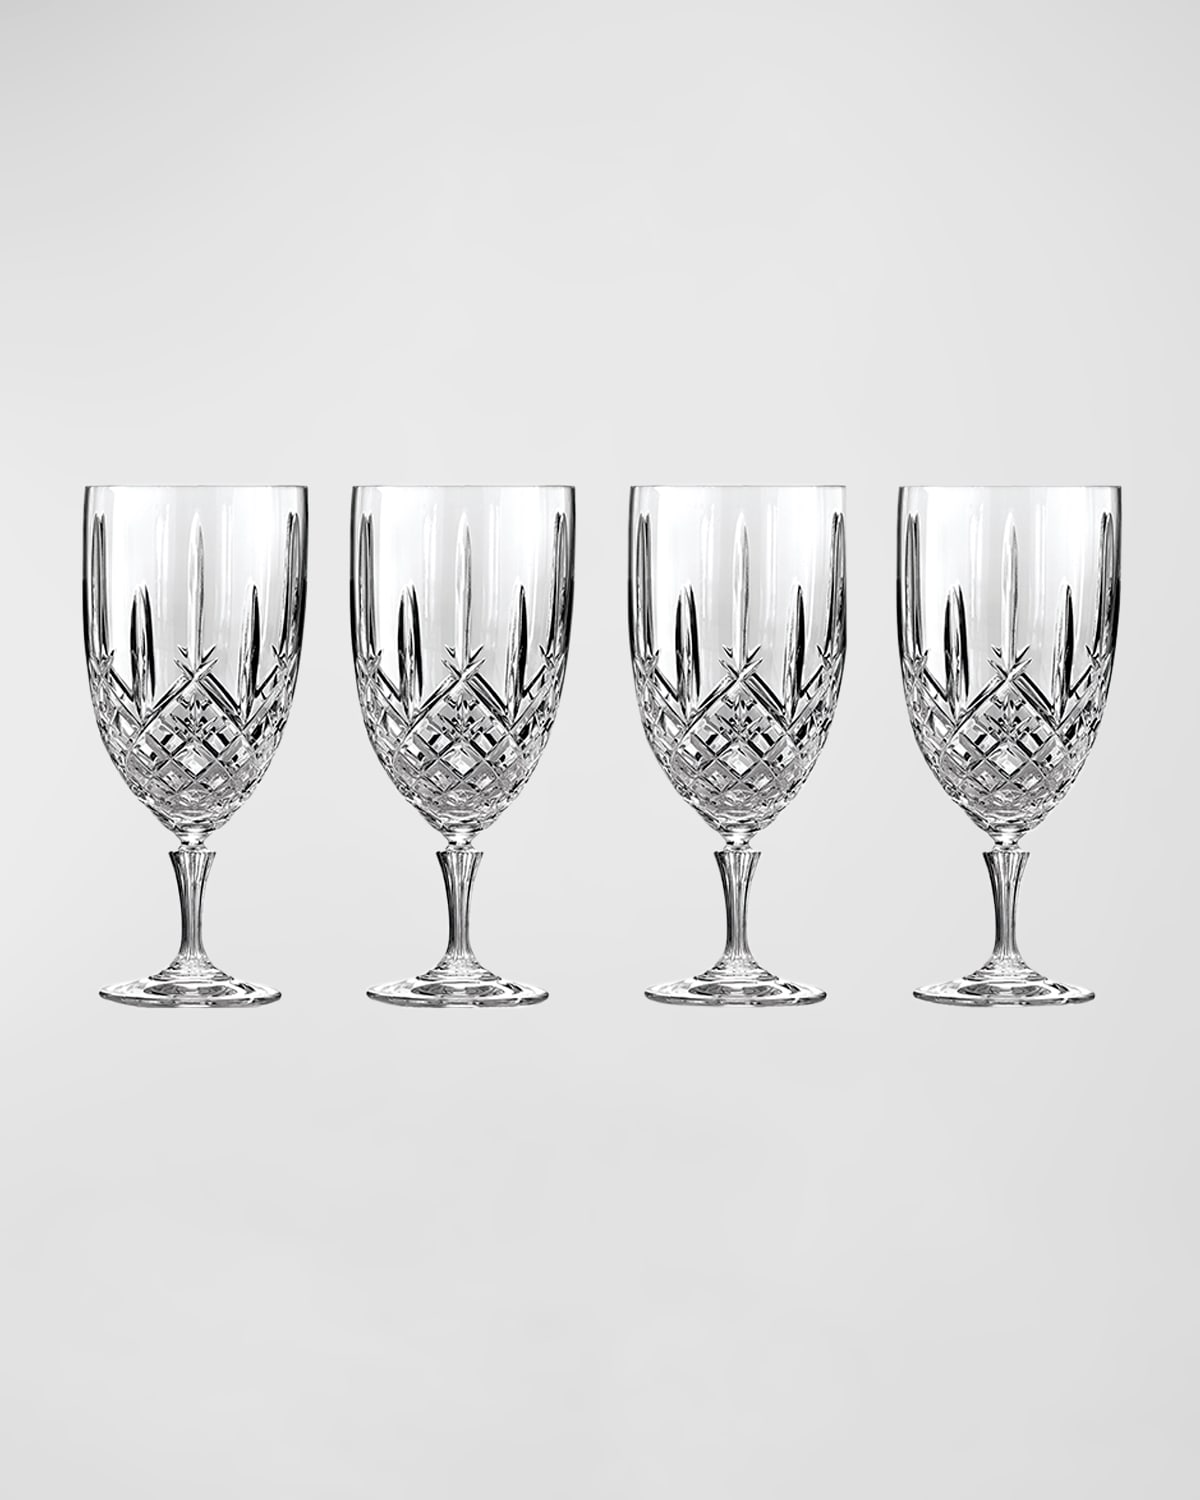 Marquis By Waterford Markham Iced Beverage Glasses, Set Of 4